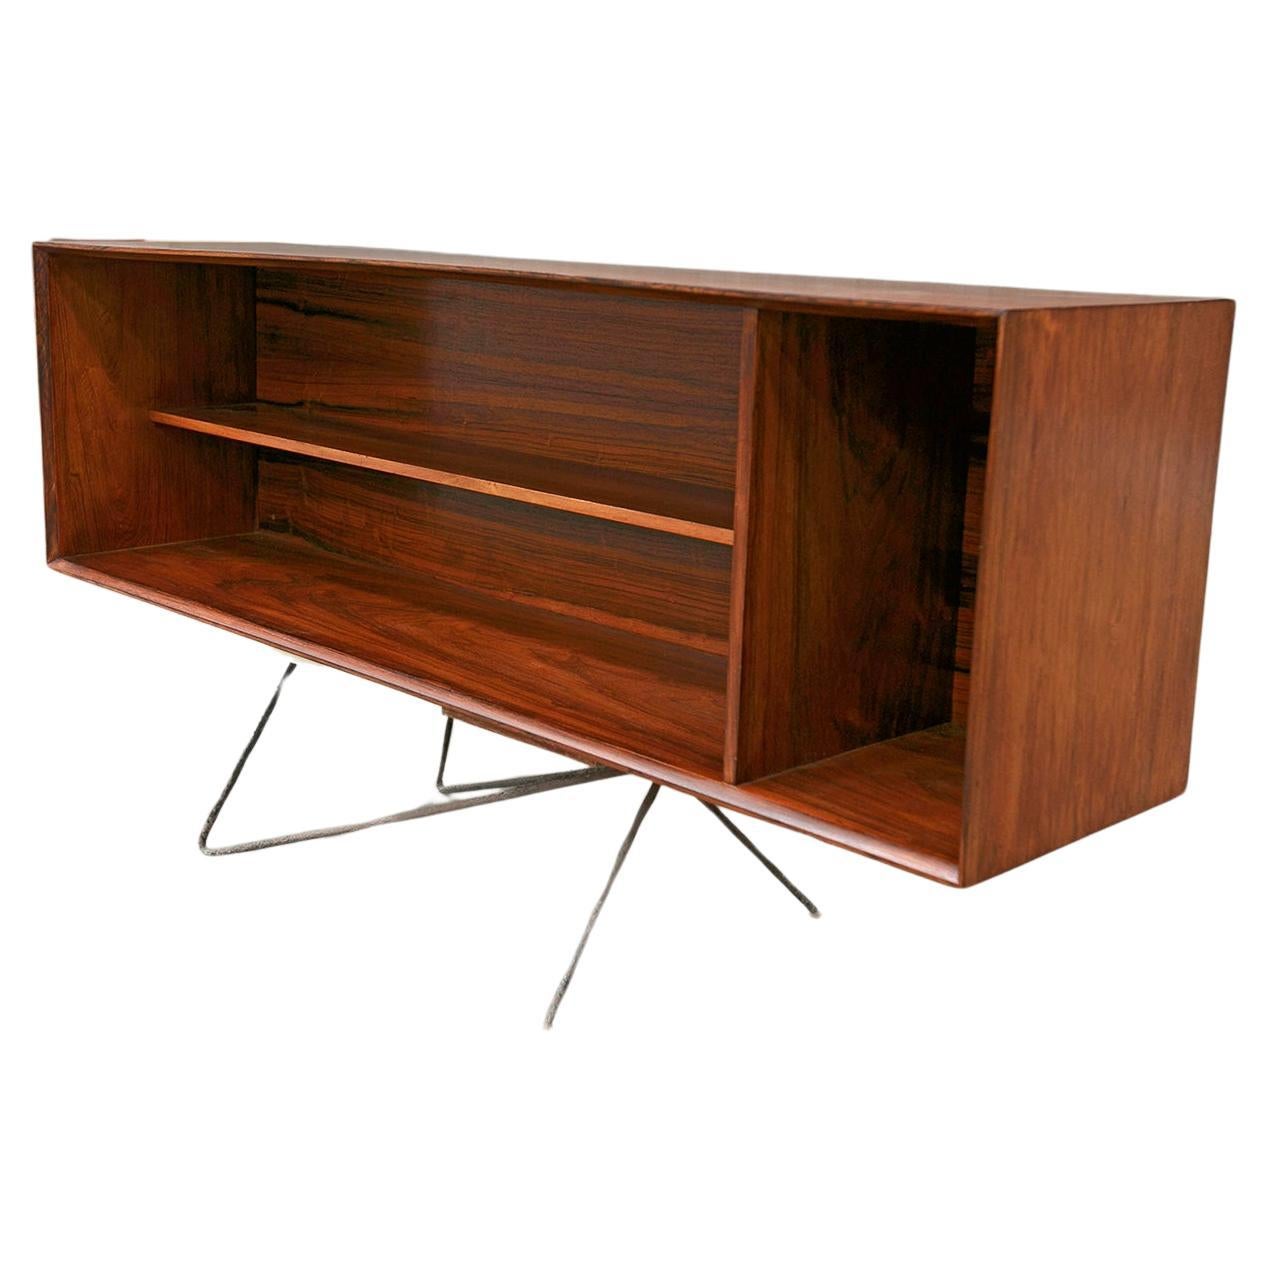 Floating Wall Sideboard in Hardwood by Carlo Hauner for Forma, c. 1950 Brazil